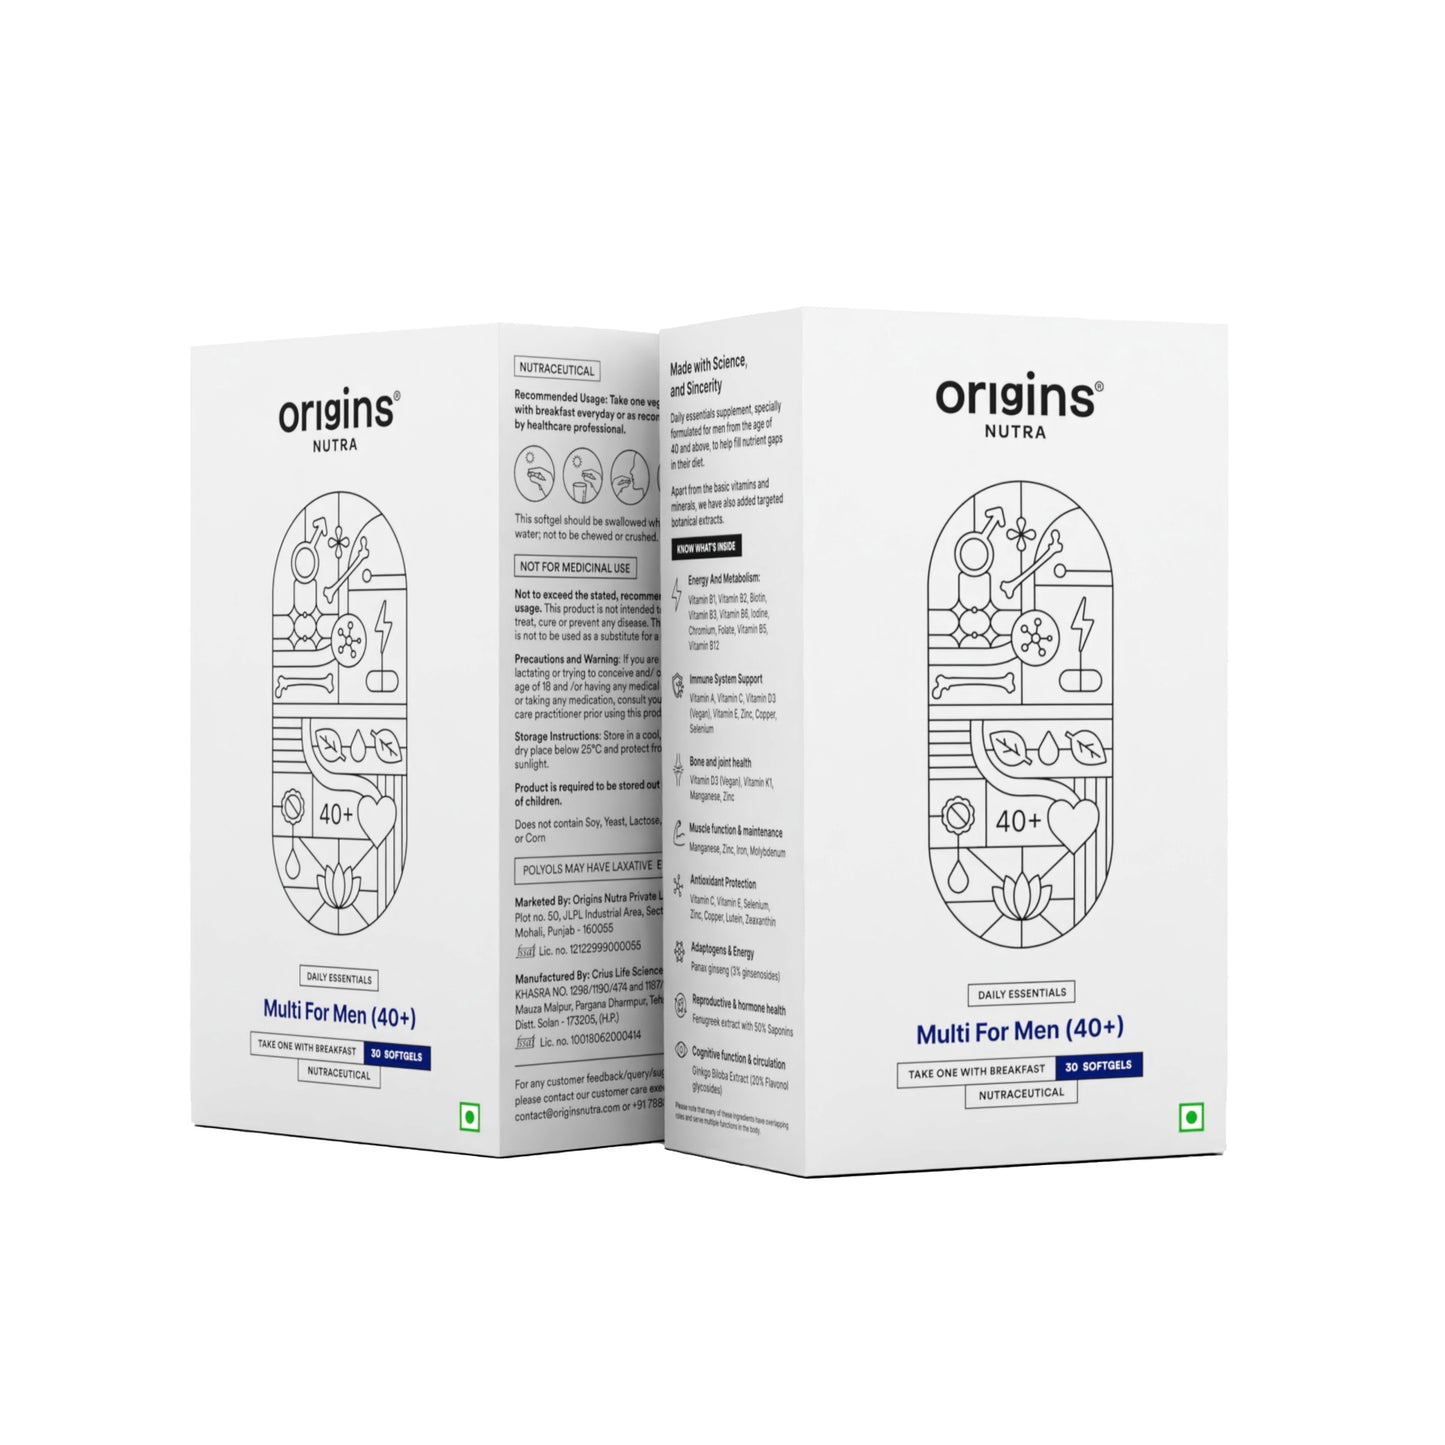 Origins Nutra Multi For Men (40+) | Boost Energy & Metabolism, Immune Support, Bone and Joint Support | Panax Ginseng Extract,Vitamins & Minerals | GMP Certified | Non-GMO | For Men (40+) | 30 Soft gels